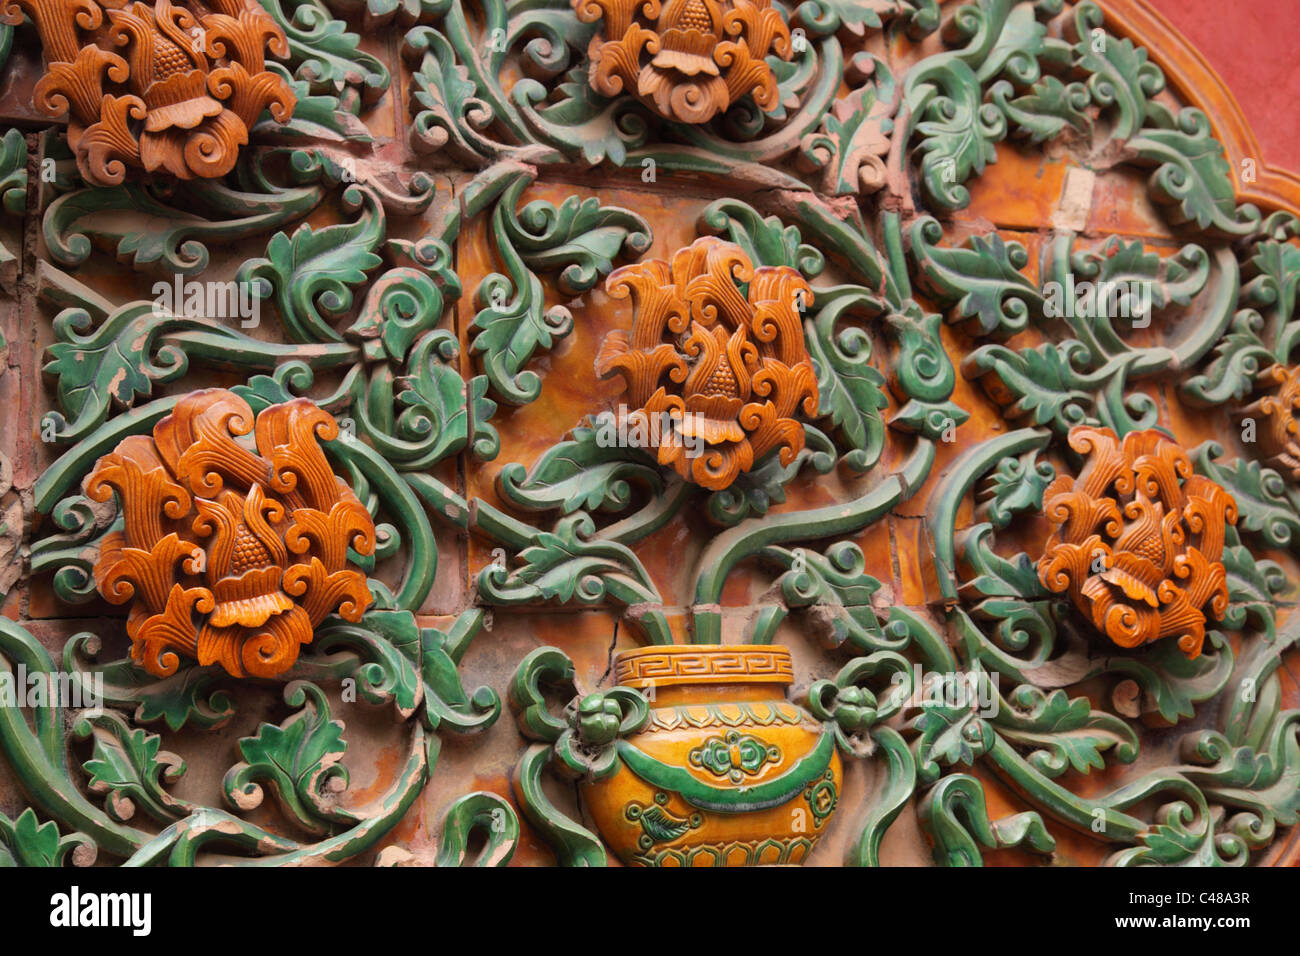 Architectural detail, Forbidden City, Beijing, China Stock Photo